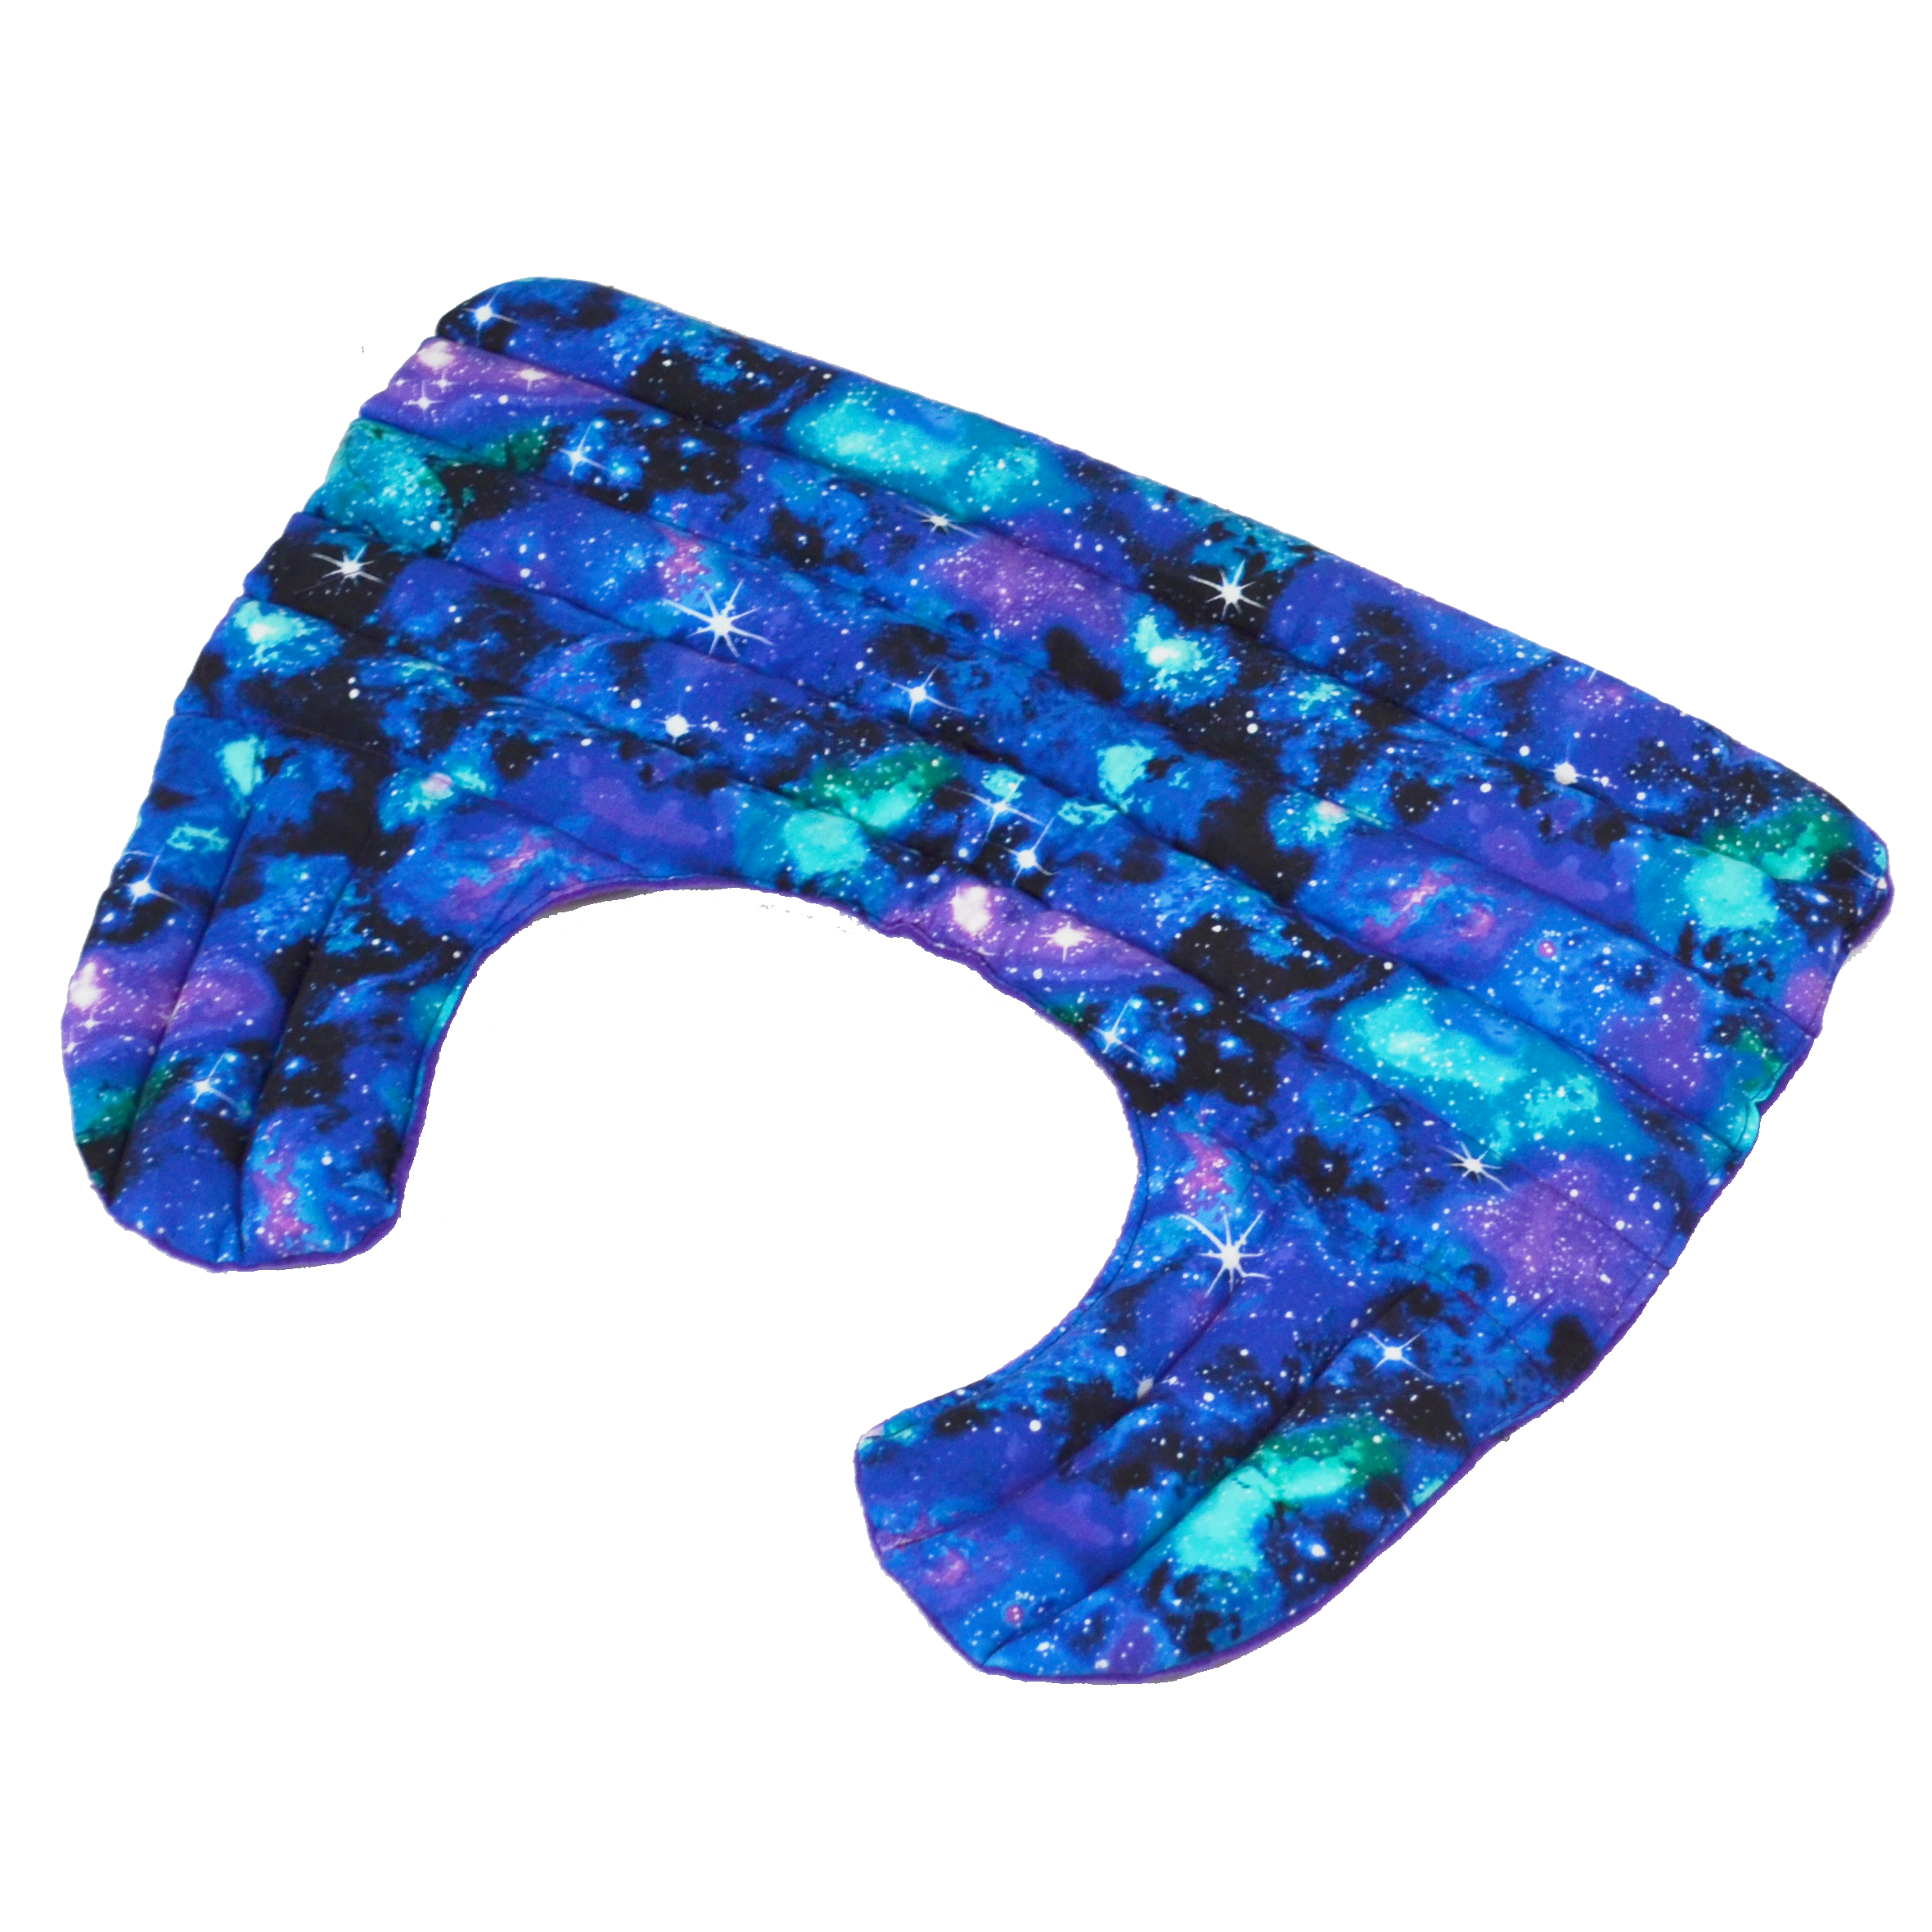 https://www.therapyshoppe.com/images/parents-place/galaxy_shoulder_wrap_cropped.png